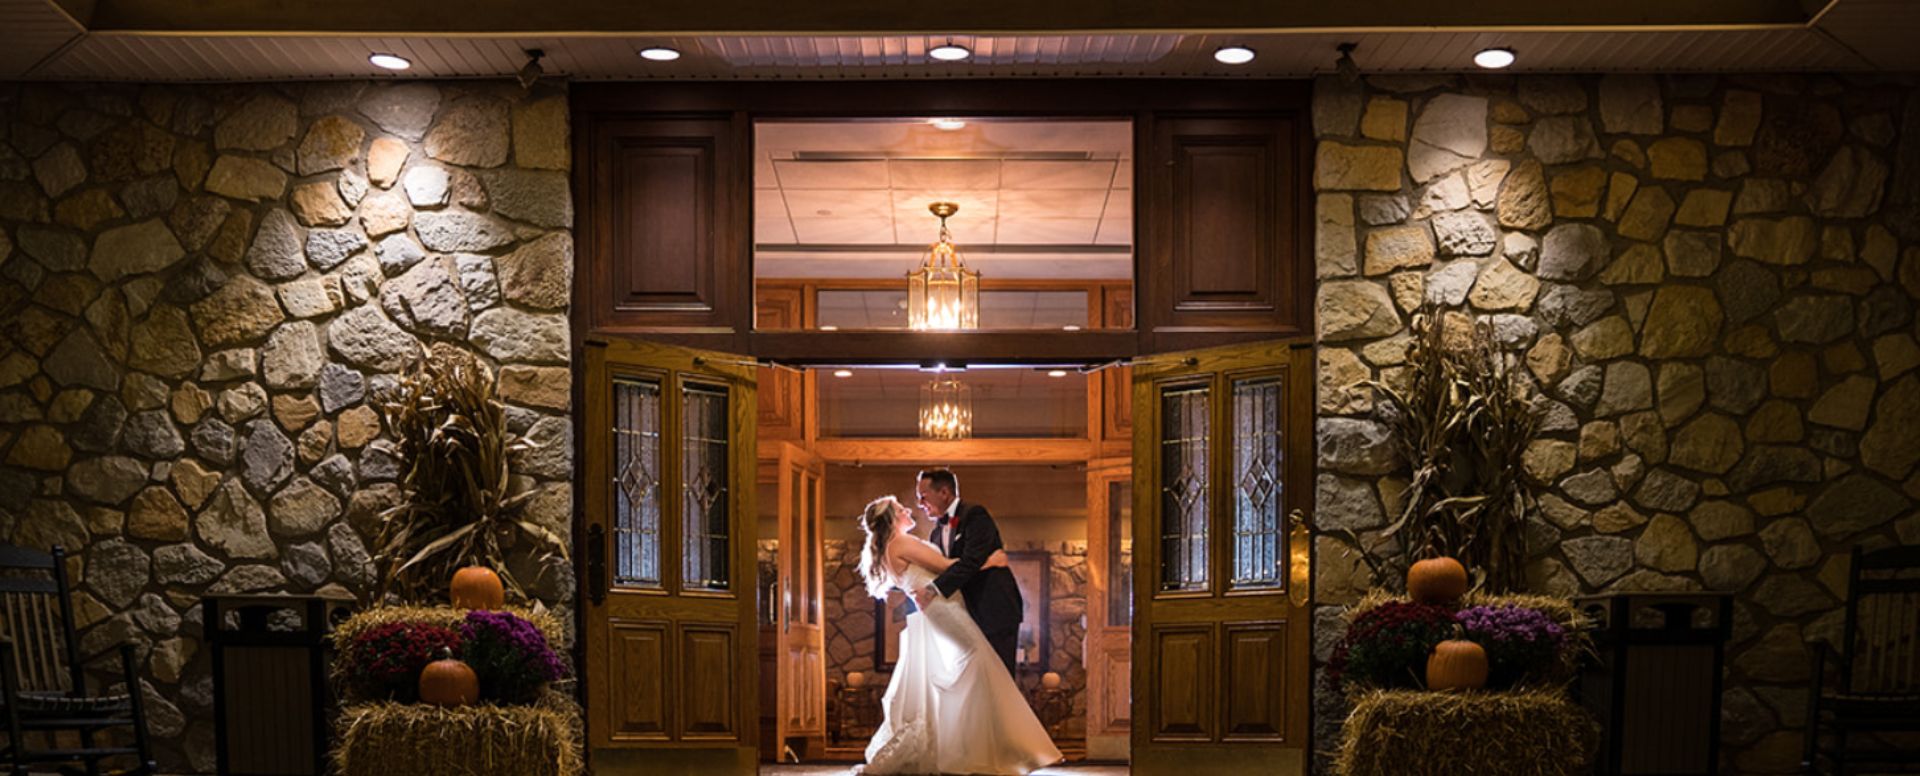 Hear from a Local Photographer about White Manor Country Club’s Stunning Venue